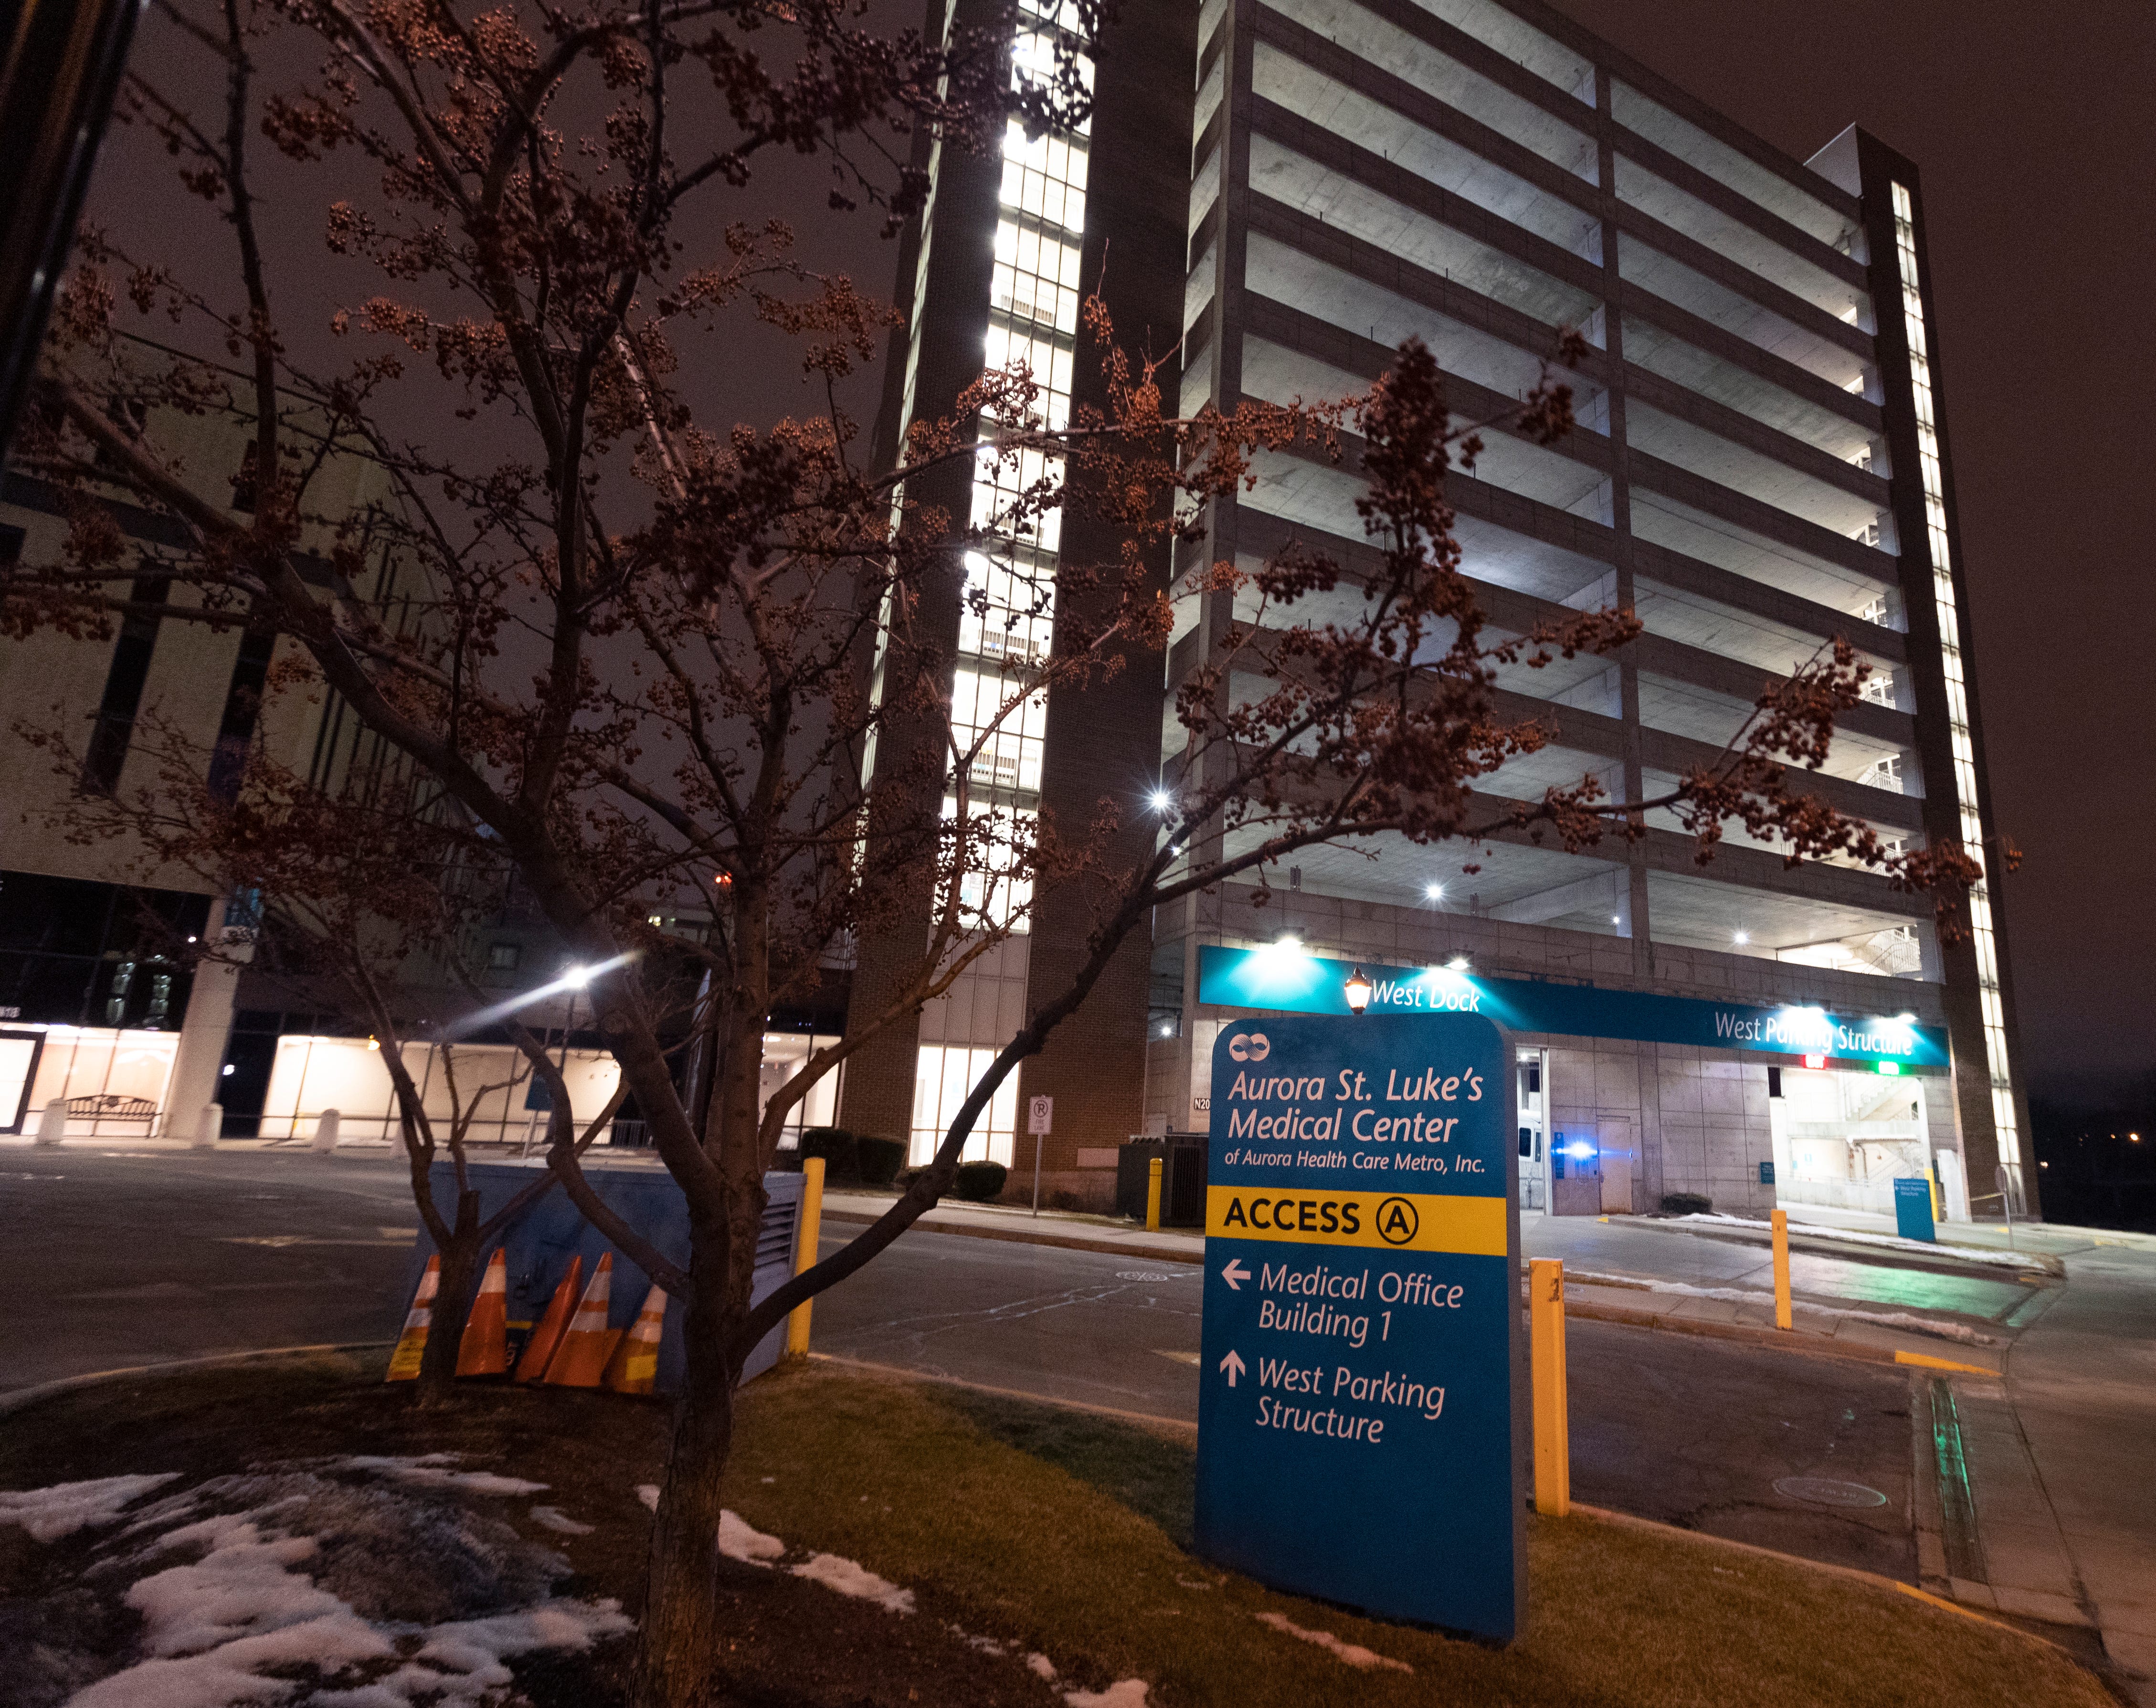 The west parking structure is shown Tuesday, February 25, 2020 at Aurora St. Luke's Medical Center in Milwaukee, Wis. The Milwaukee Journal Sentinel enlisted the aid of an architectural security consultant to evaluate parking ramps at five Milwaukee hospitals.